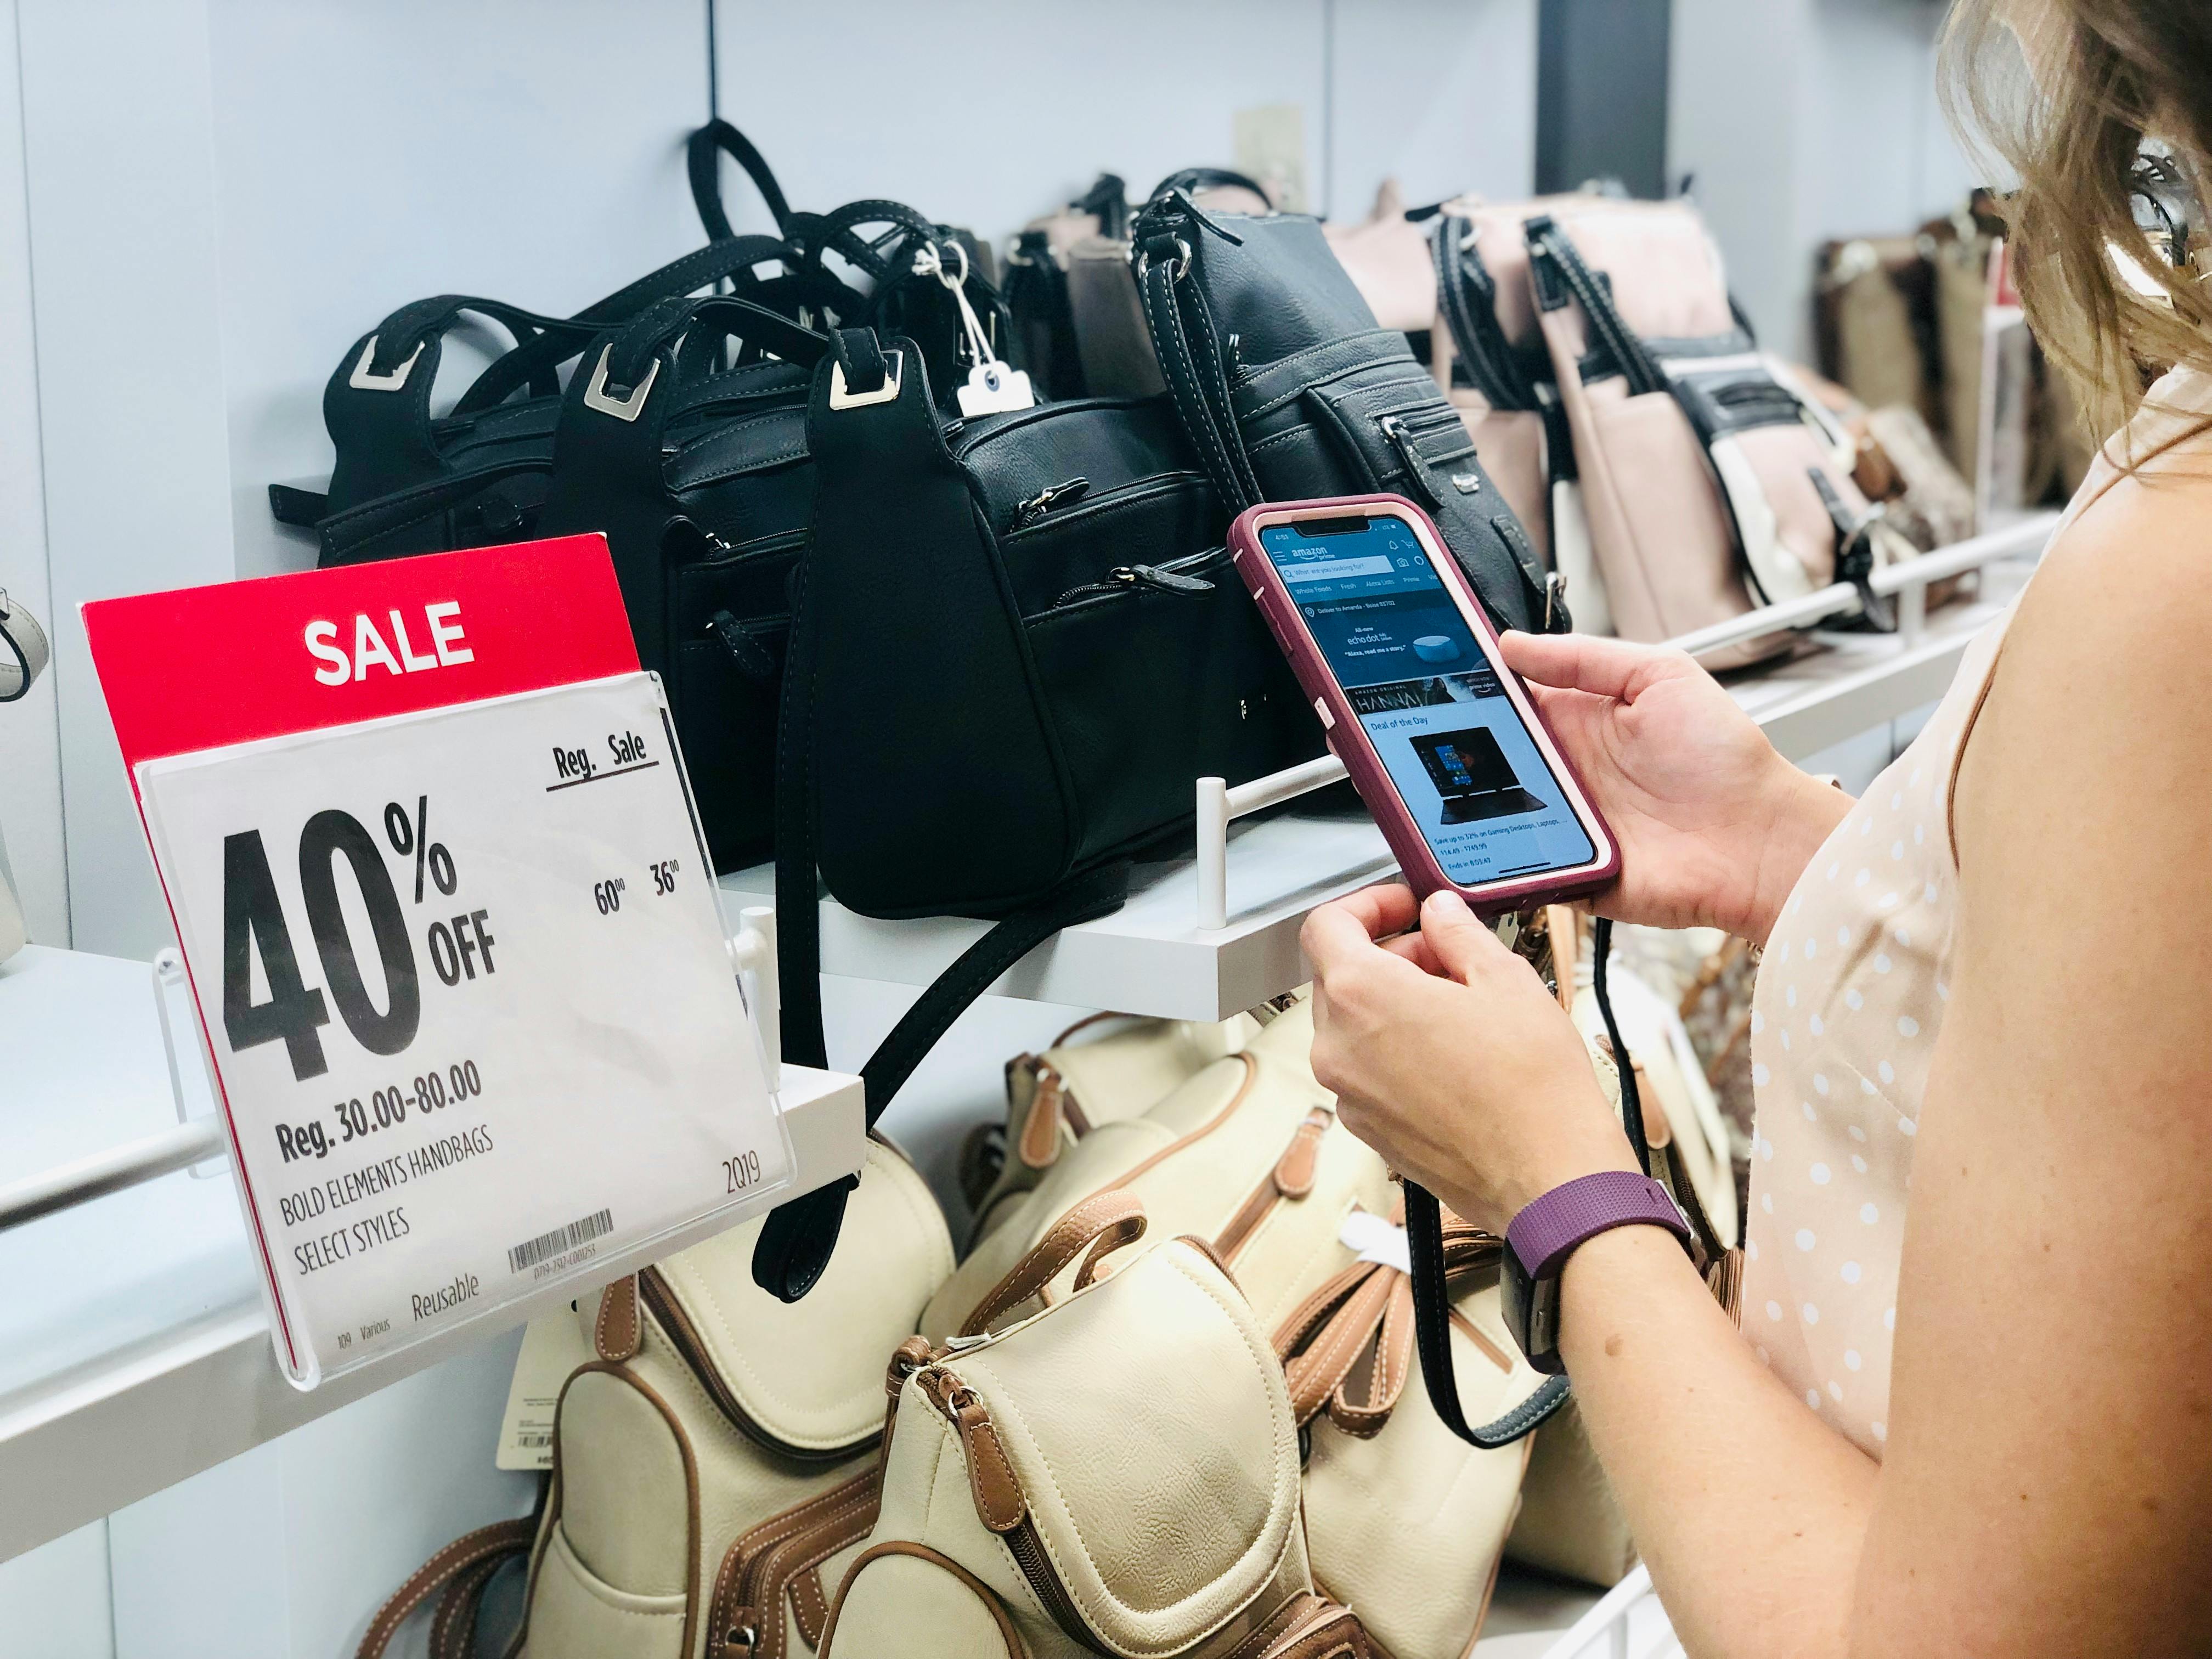 Clearance Handbags, Starting at $8.39 at JCPenney - The Krazy Coupon Lady